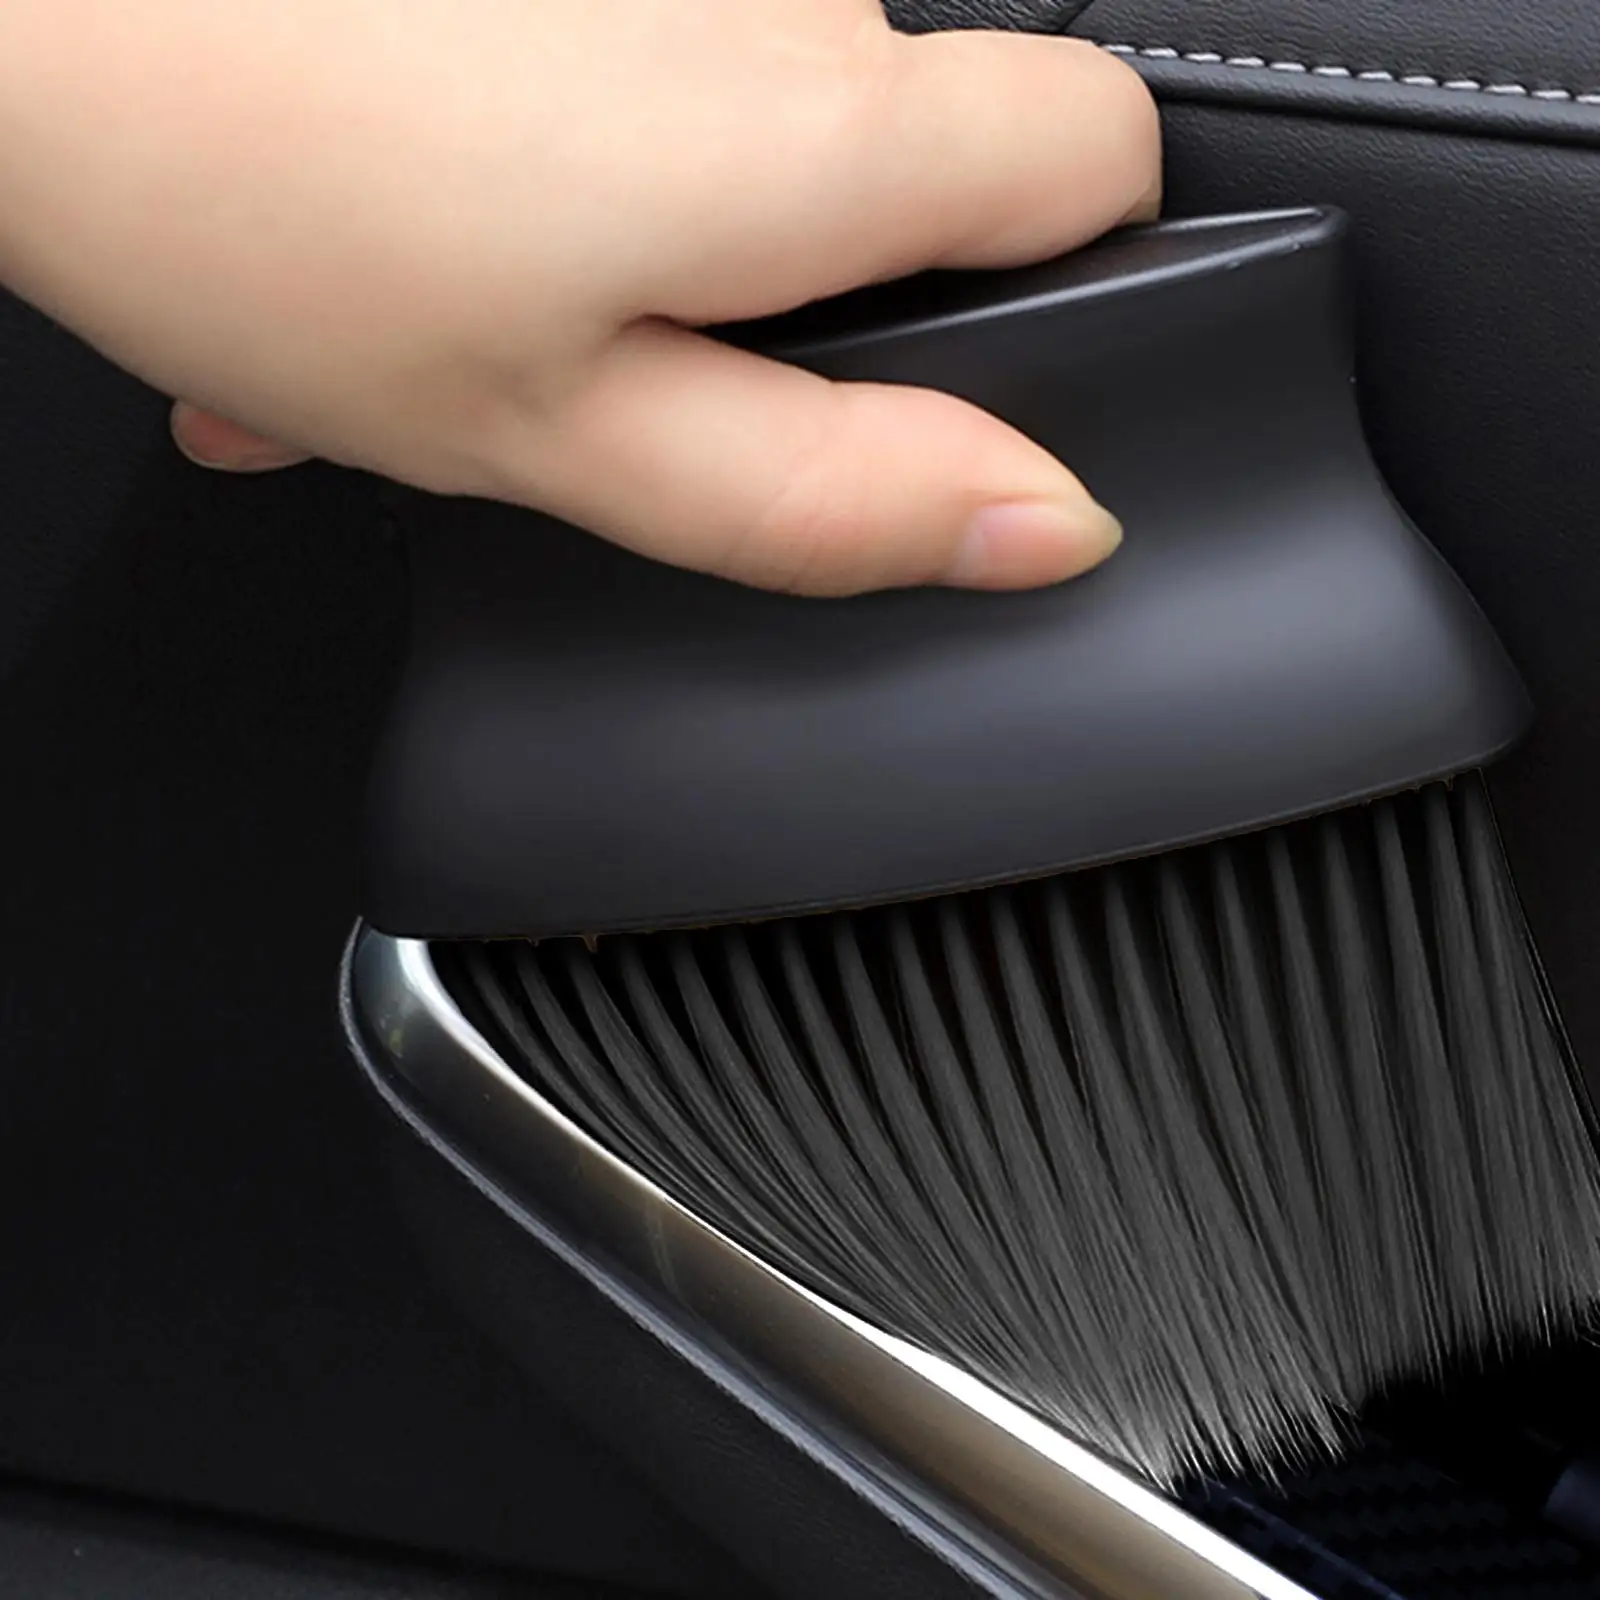 Car Detailing Brushes Soft Bristles Scratch Free Duster Dust Removal Brush for Air Outlet Gap Keyboard Office Home Gadgets